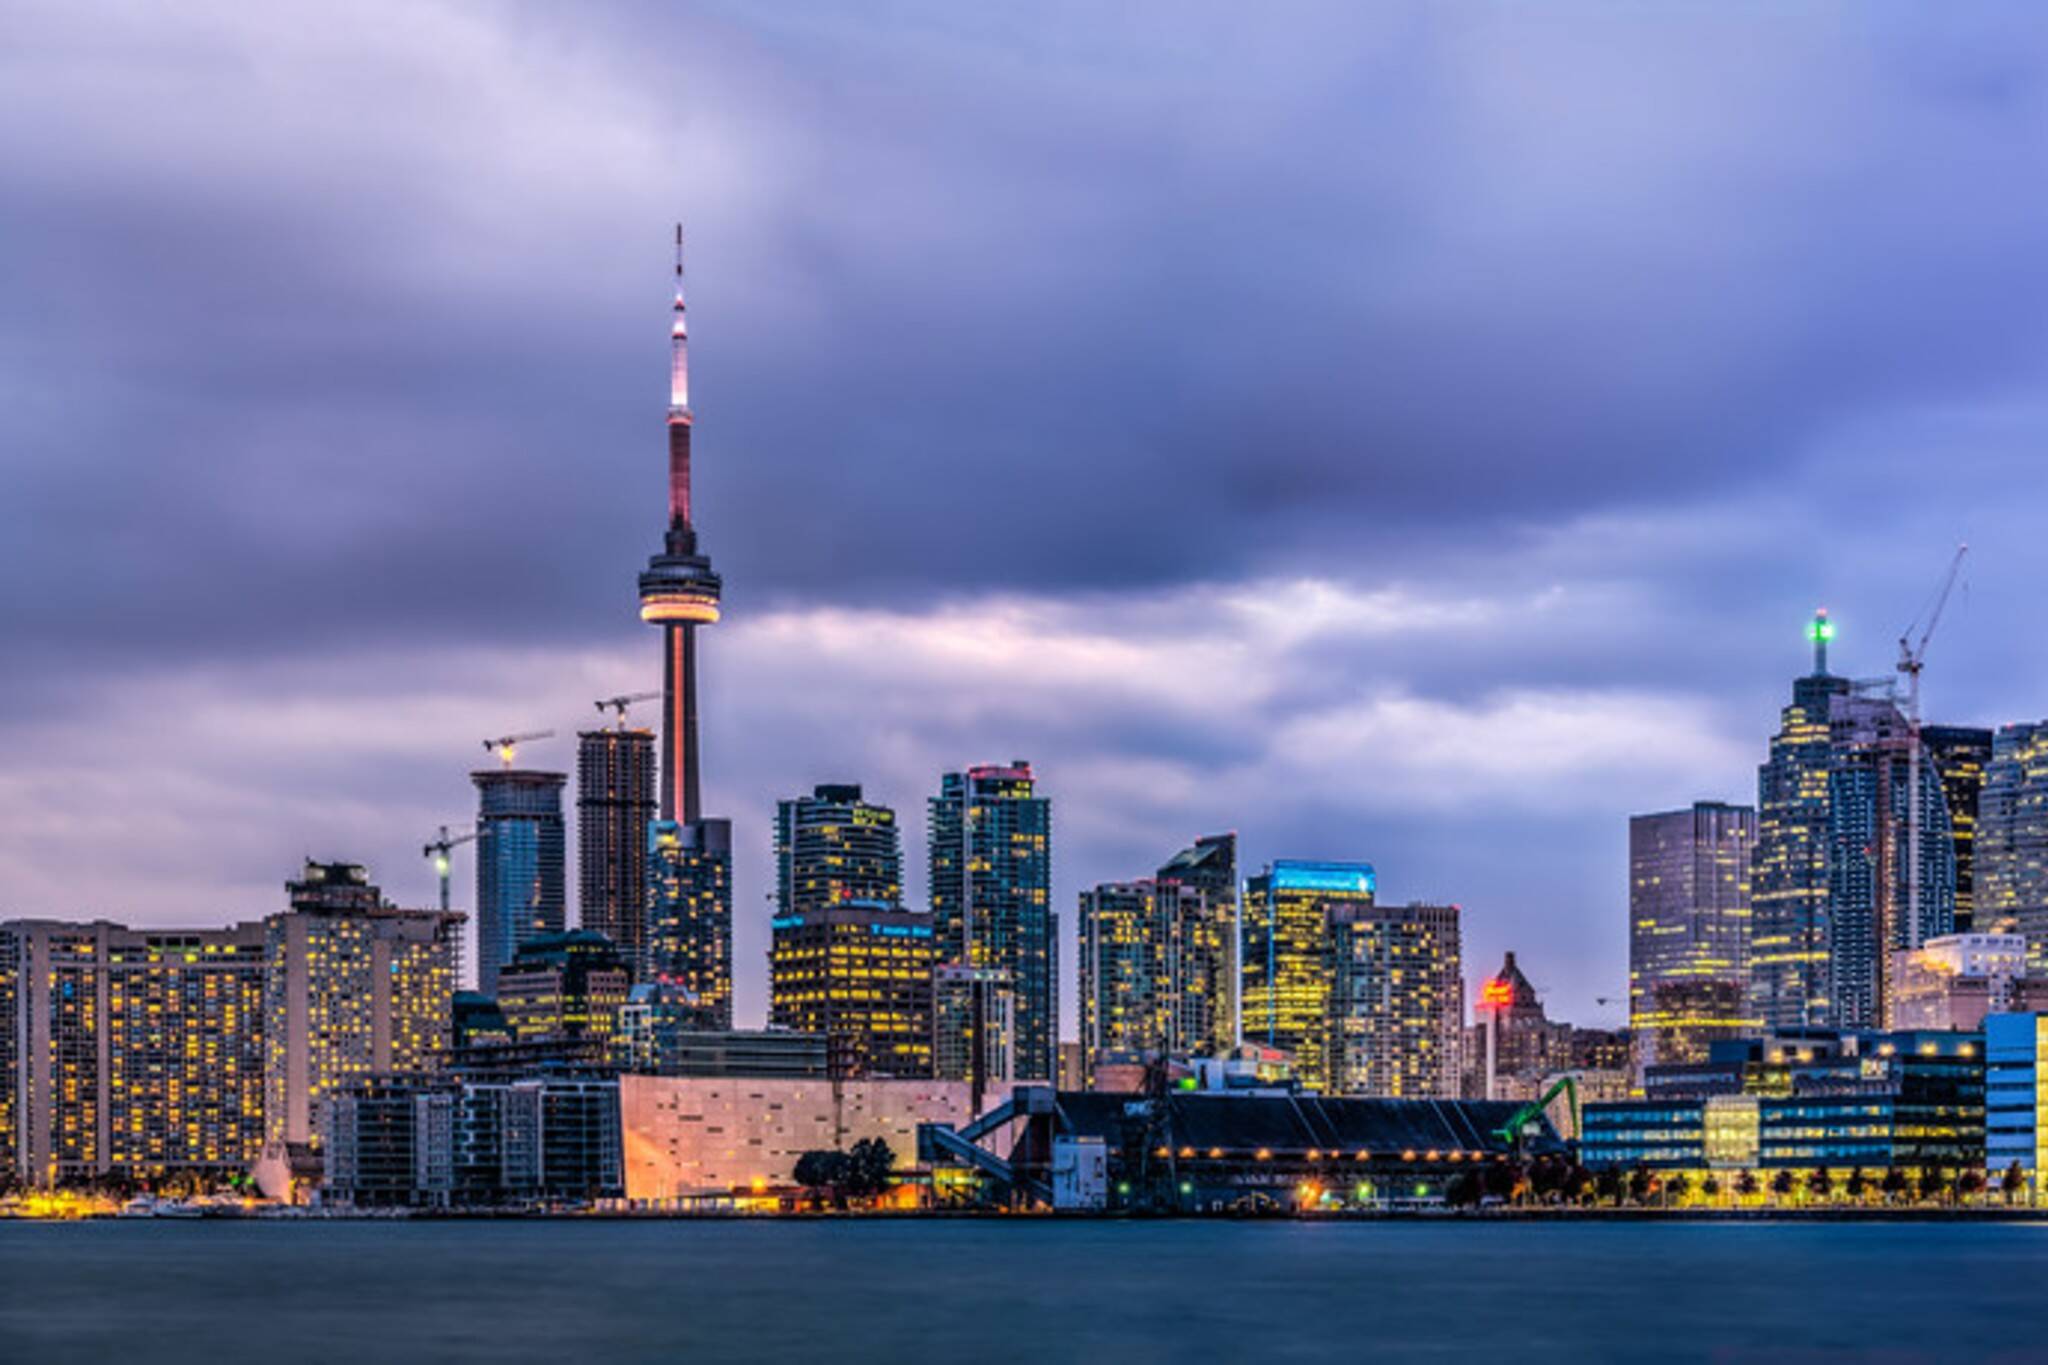 Toronto ranked the 6th safest city in the world